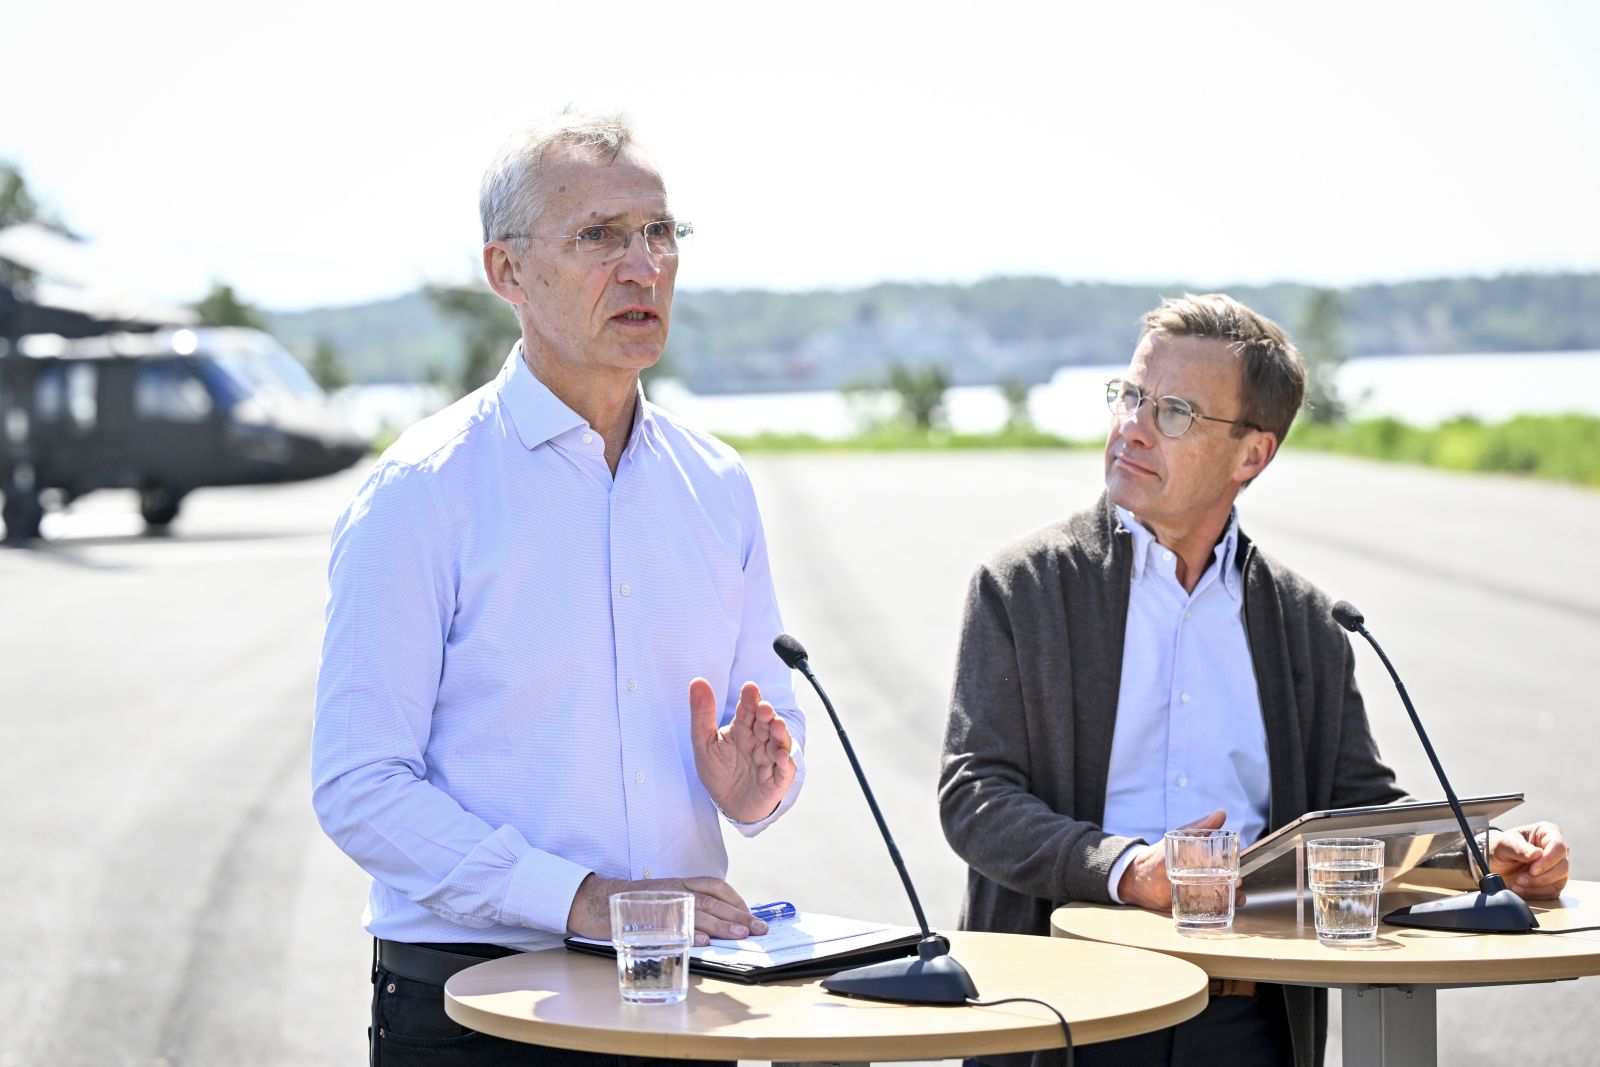 epa11395088 NATO Secretary General Jens Stoltenberg (L) and Sweden's Prime Minister Ulf Kristersson hold a news conference in connection with bilateral talks and a demonstration of the Swedish Armed Forces' activities at the Stockholm Amphibian Regiment in Berga, Sweden, 07 June 2024. Stoltenberg is in Sweden from 06 to 07 June to attend Sweden's National Day and a military demonstration by the Swedish Armed Forces.  EPA/HENRIK MONTGOMERY SWEDEN OUT